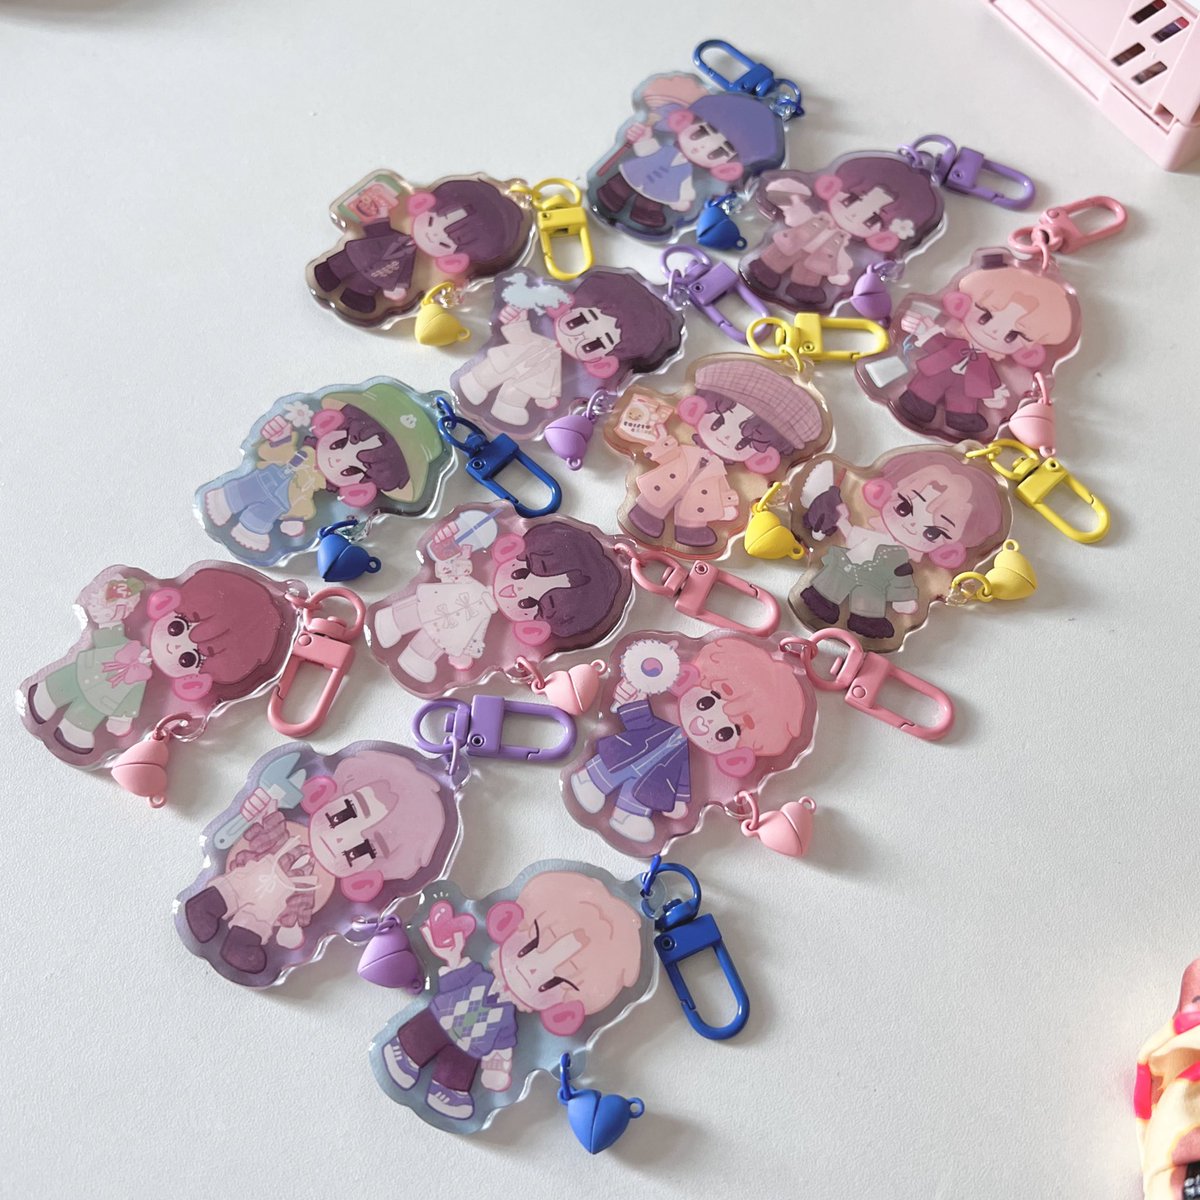 stickers and keychains made with love 💗⭐️☁️